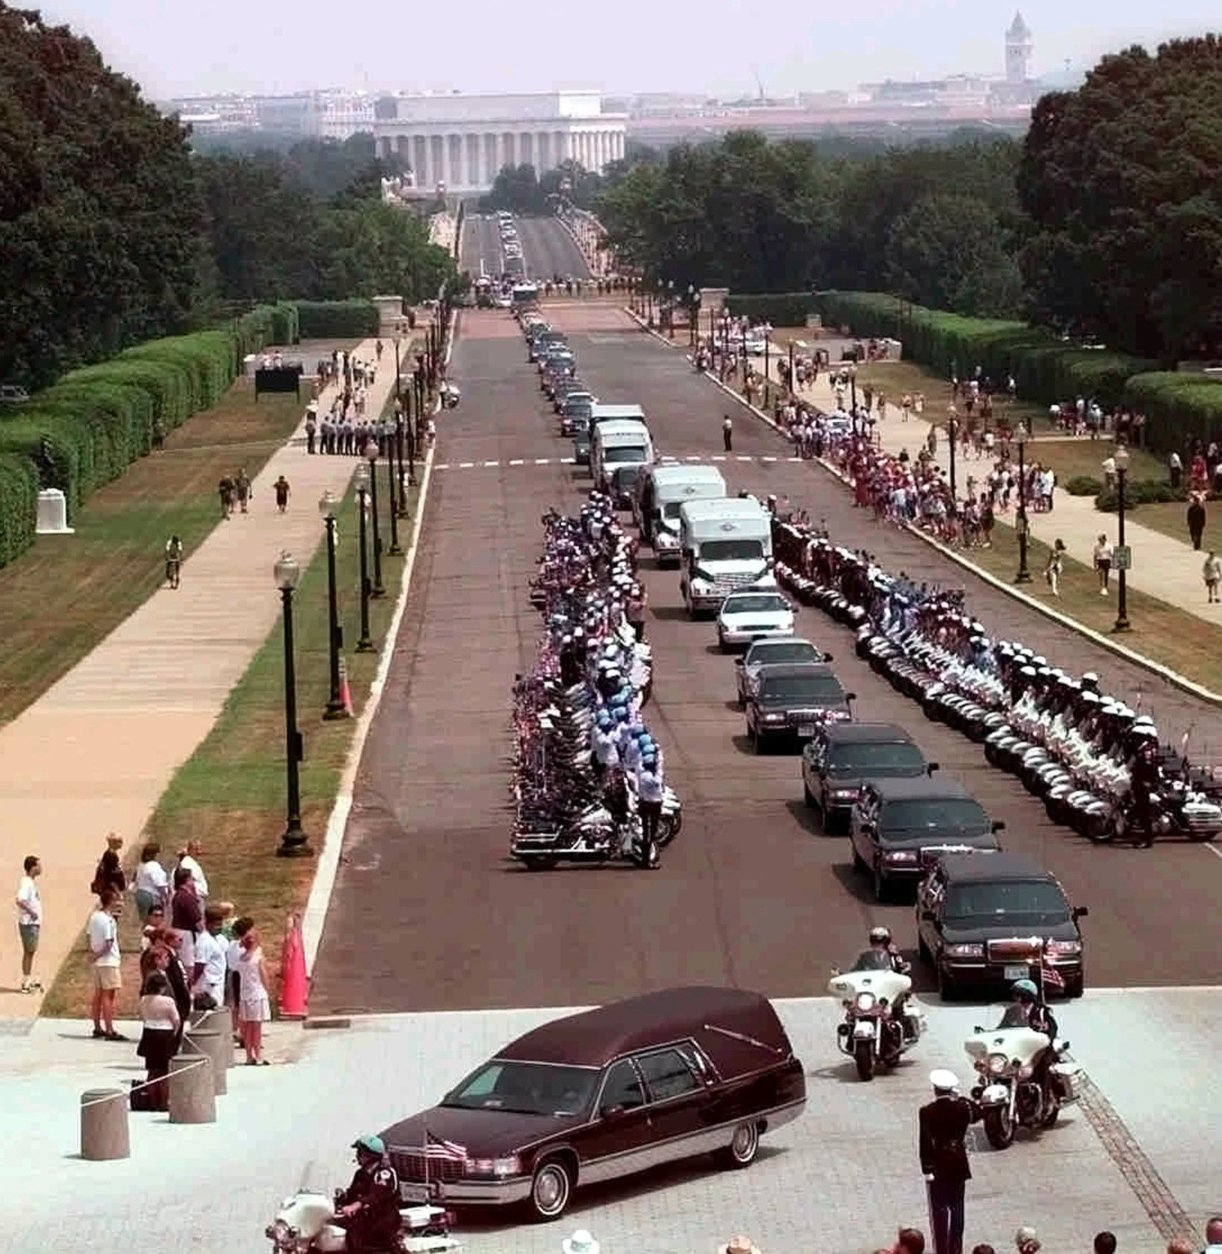 A hearse carring the body of fallen Capitol Police officer John Gibson turns off Memorial Drive and into Arlington National Cemetery in Arlington, Va., during his funeral procession Thursday, July 30, 1998. (AP Photo/Stephan Savoia)